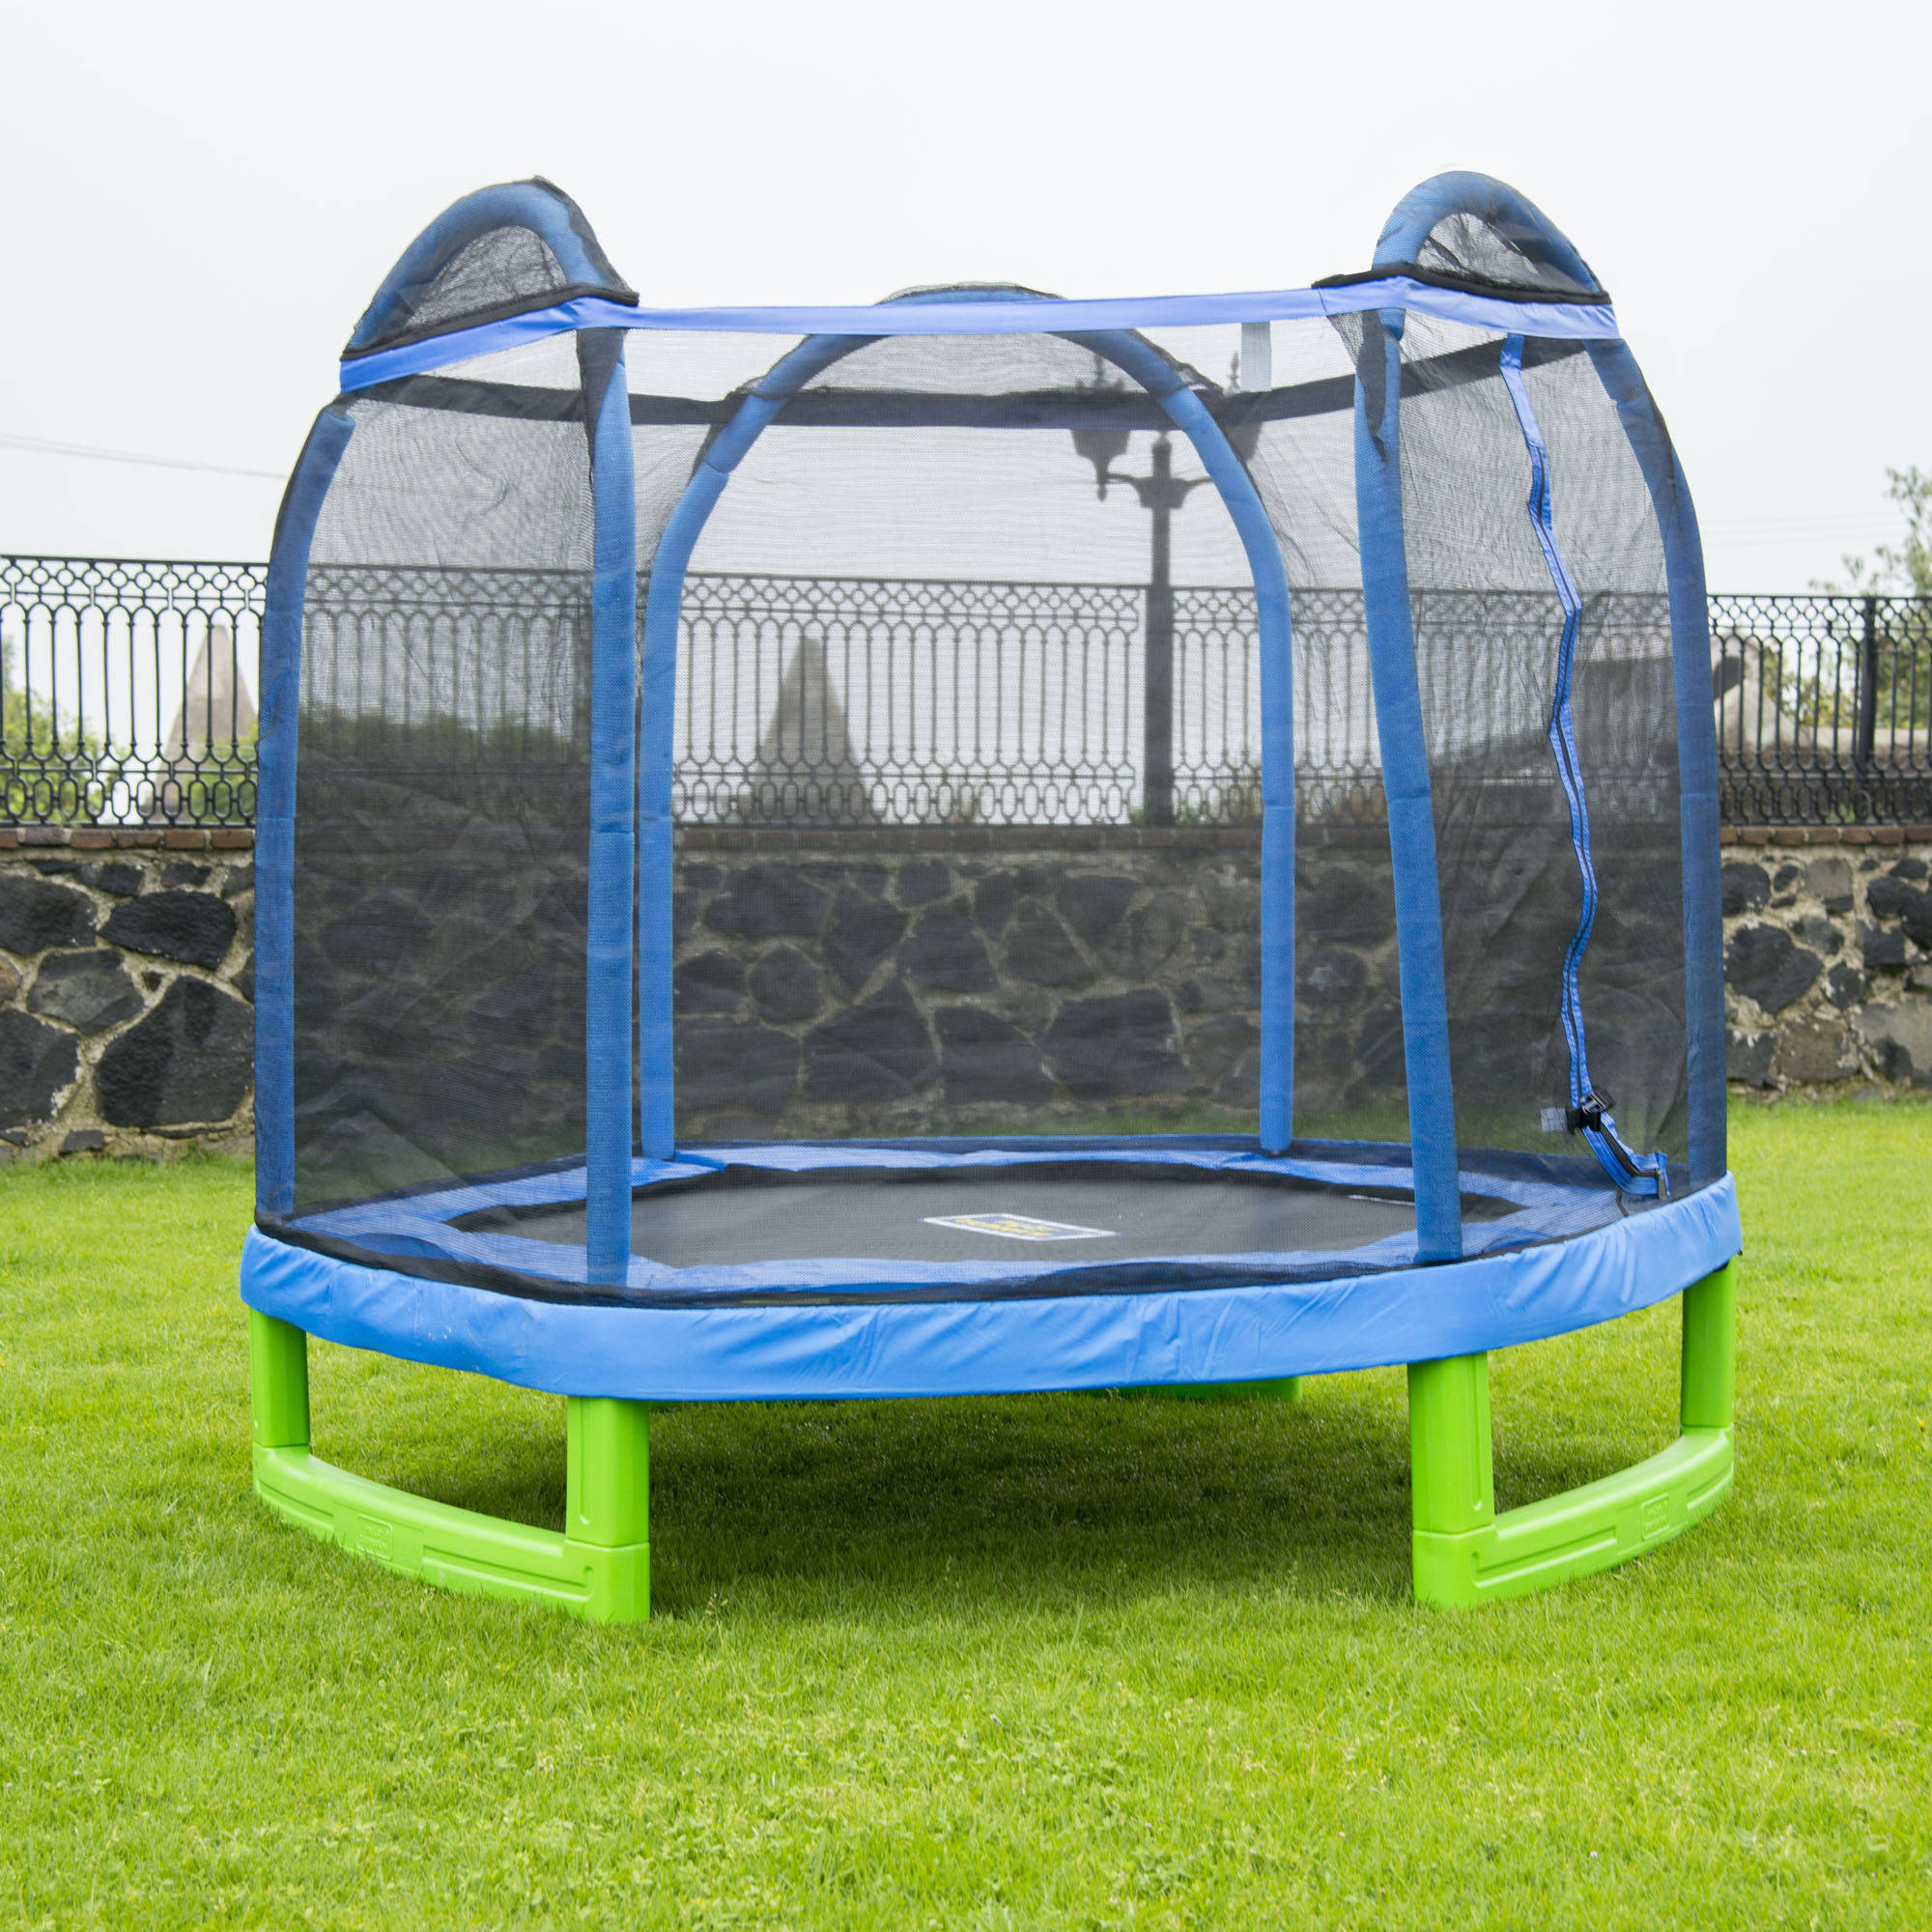 Bounce Pro 7-Foot My First Trampoline Hexagon (Ages 3-10) for Kids, Blue/Green - image 1 of 9